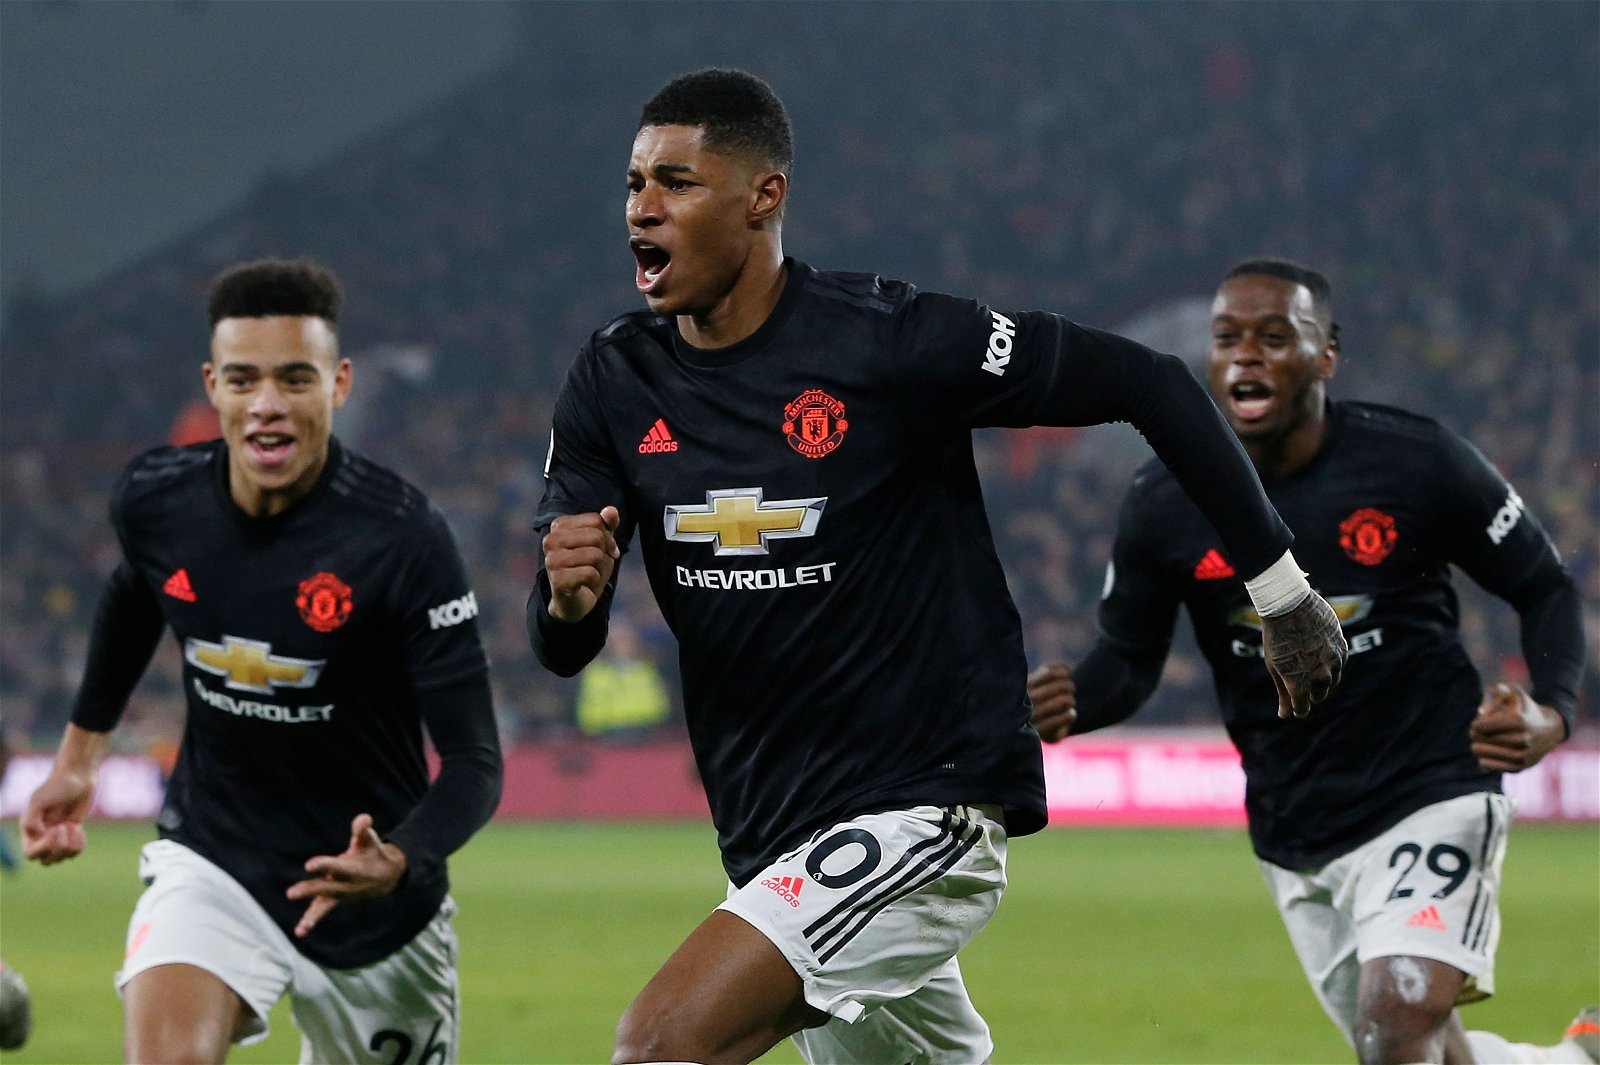 Rashford confident Manchester United are learning and improving